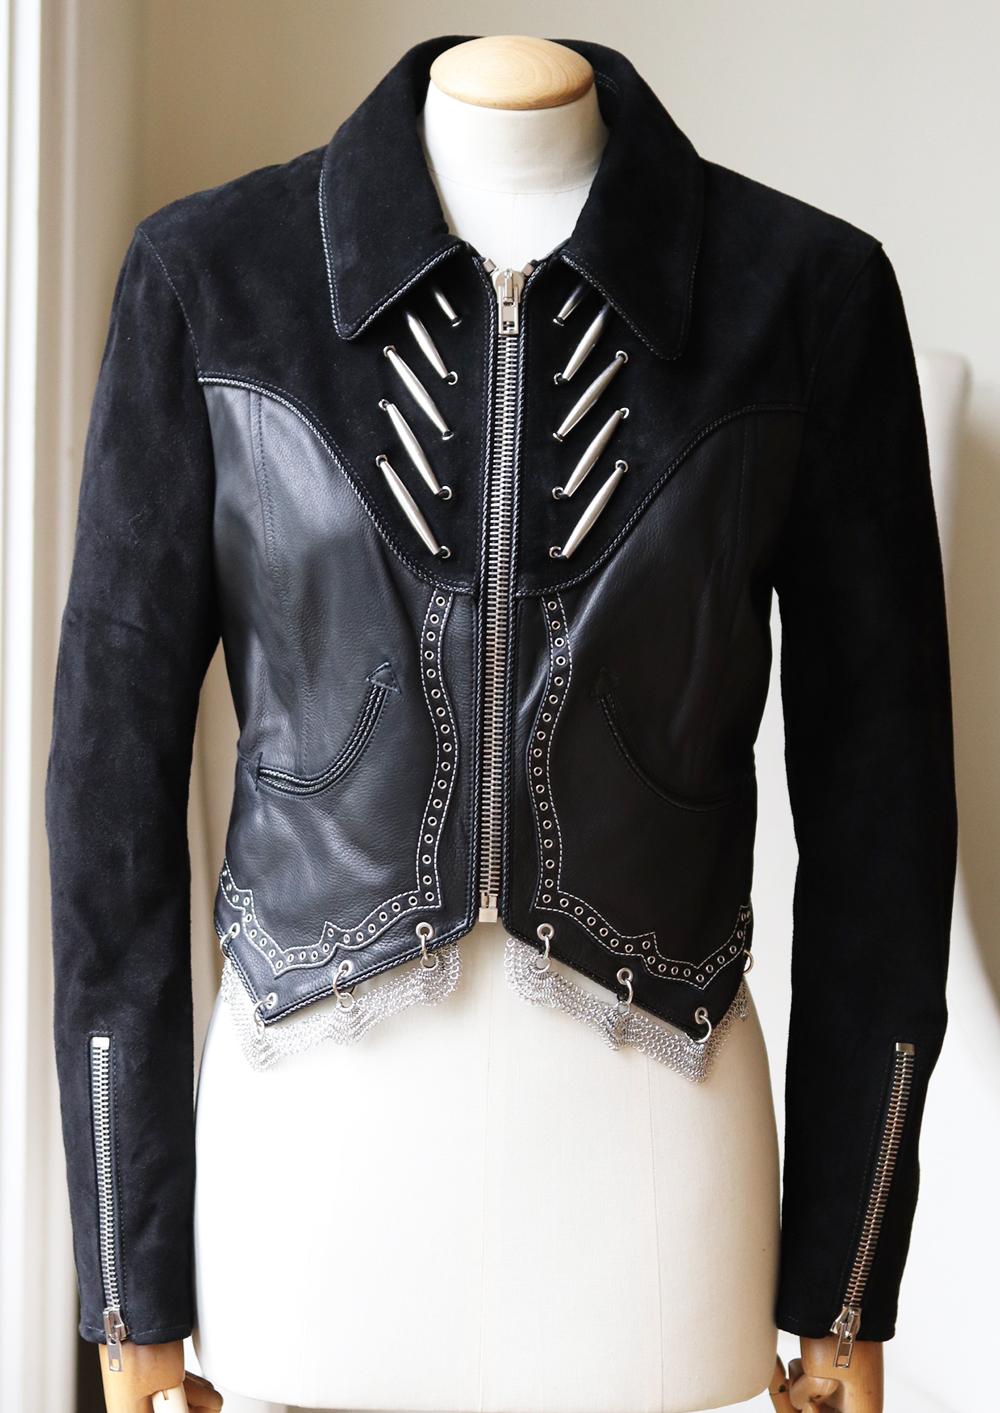 Alexander Wang takes inspiration from the glamour and attitude of Western-style.
One of the brand's standout pieces, this western-style jacket is made from buttery soft and textured leather in black with silver-tone metal detail. 
Black suede and